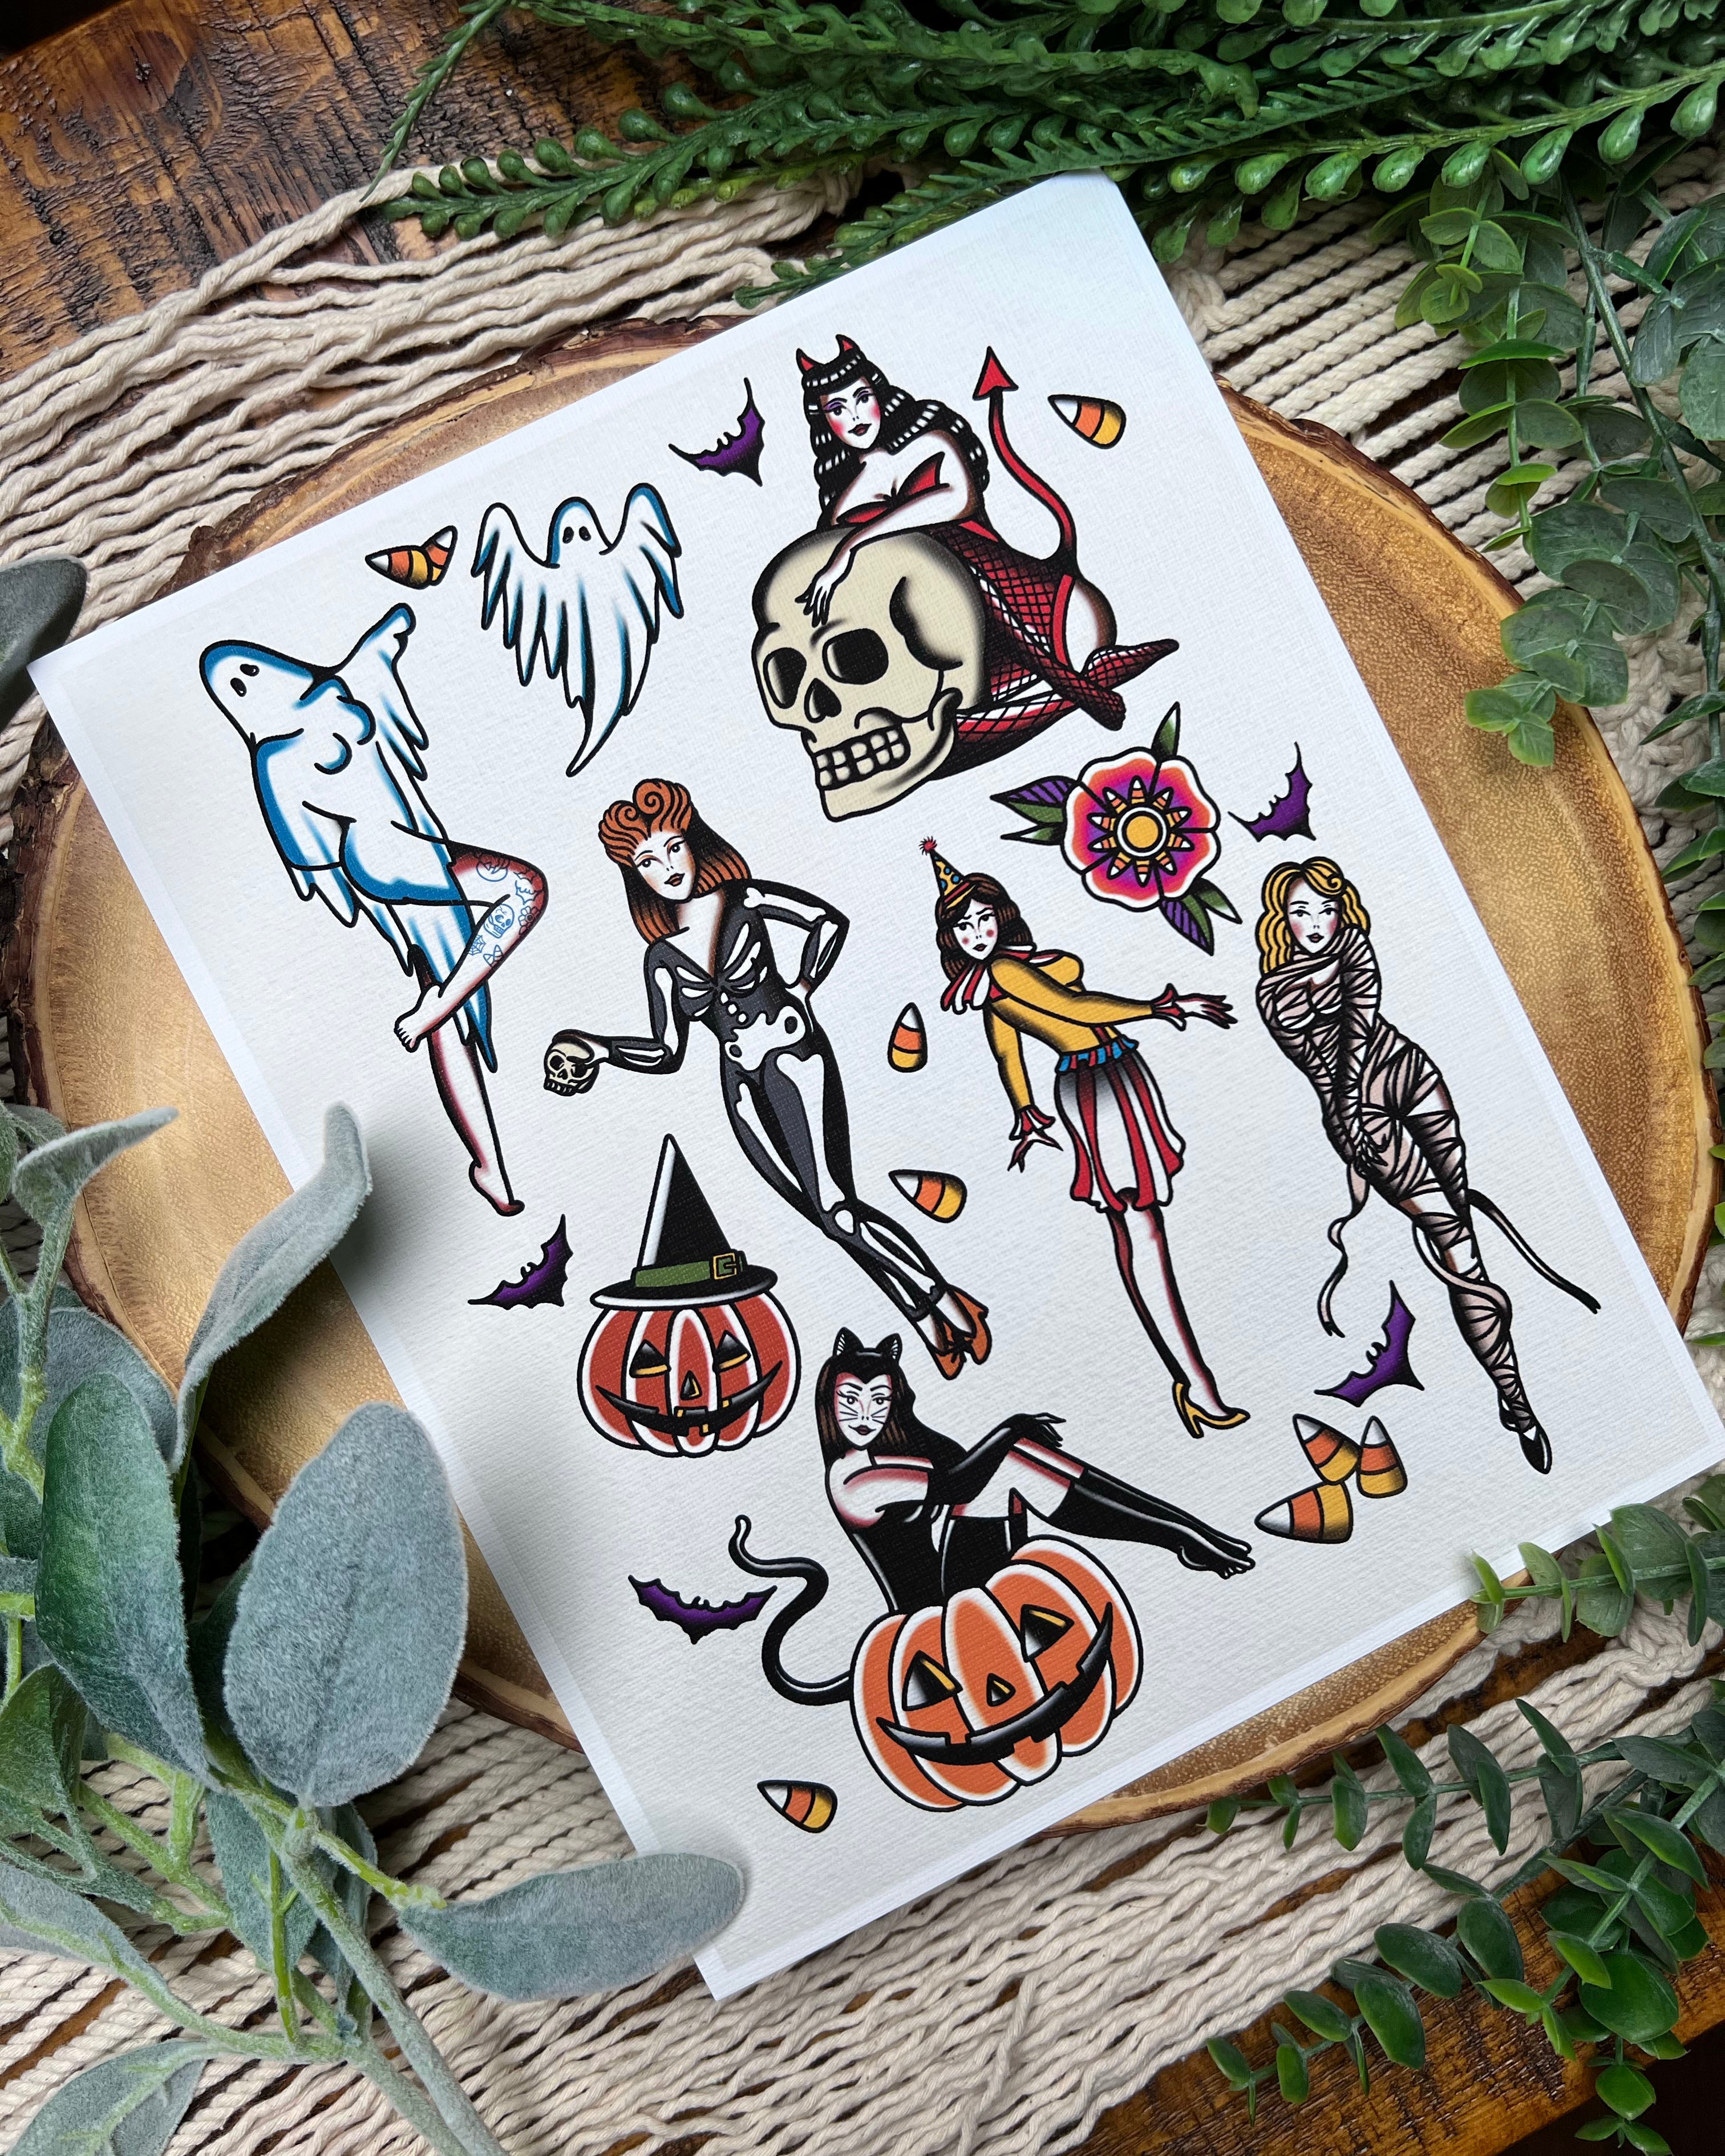 SPOOKY SEASON IS HERE!!!💀🎃 WE'RE CELEBRATING THE START OF SPOOKY SEASON  WITH SENSATIONAL TATTOO FLASH STARTING AT JUST $50!!! S... | Instagram